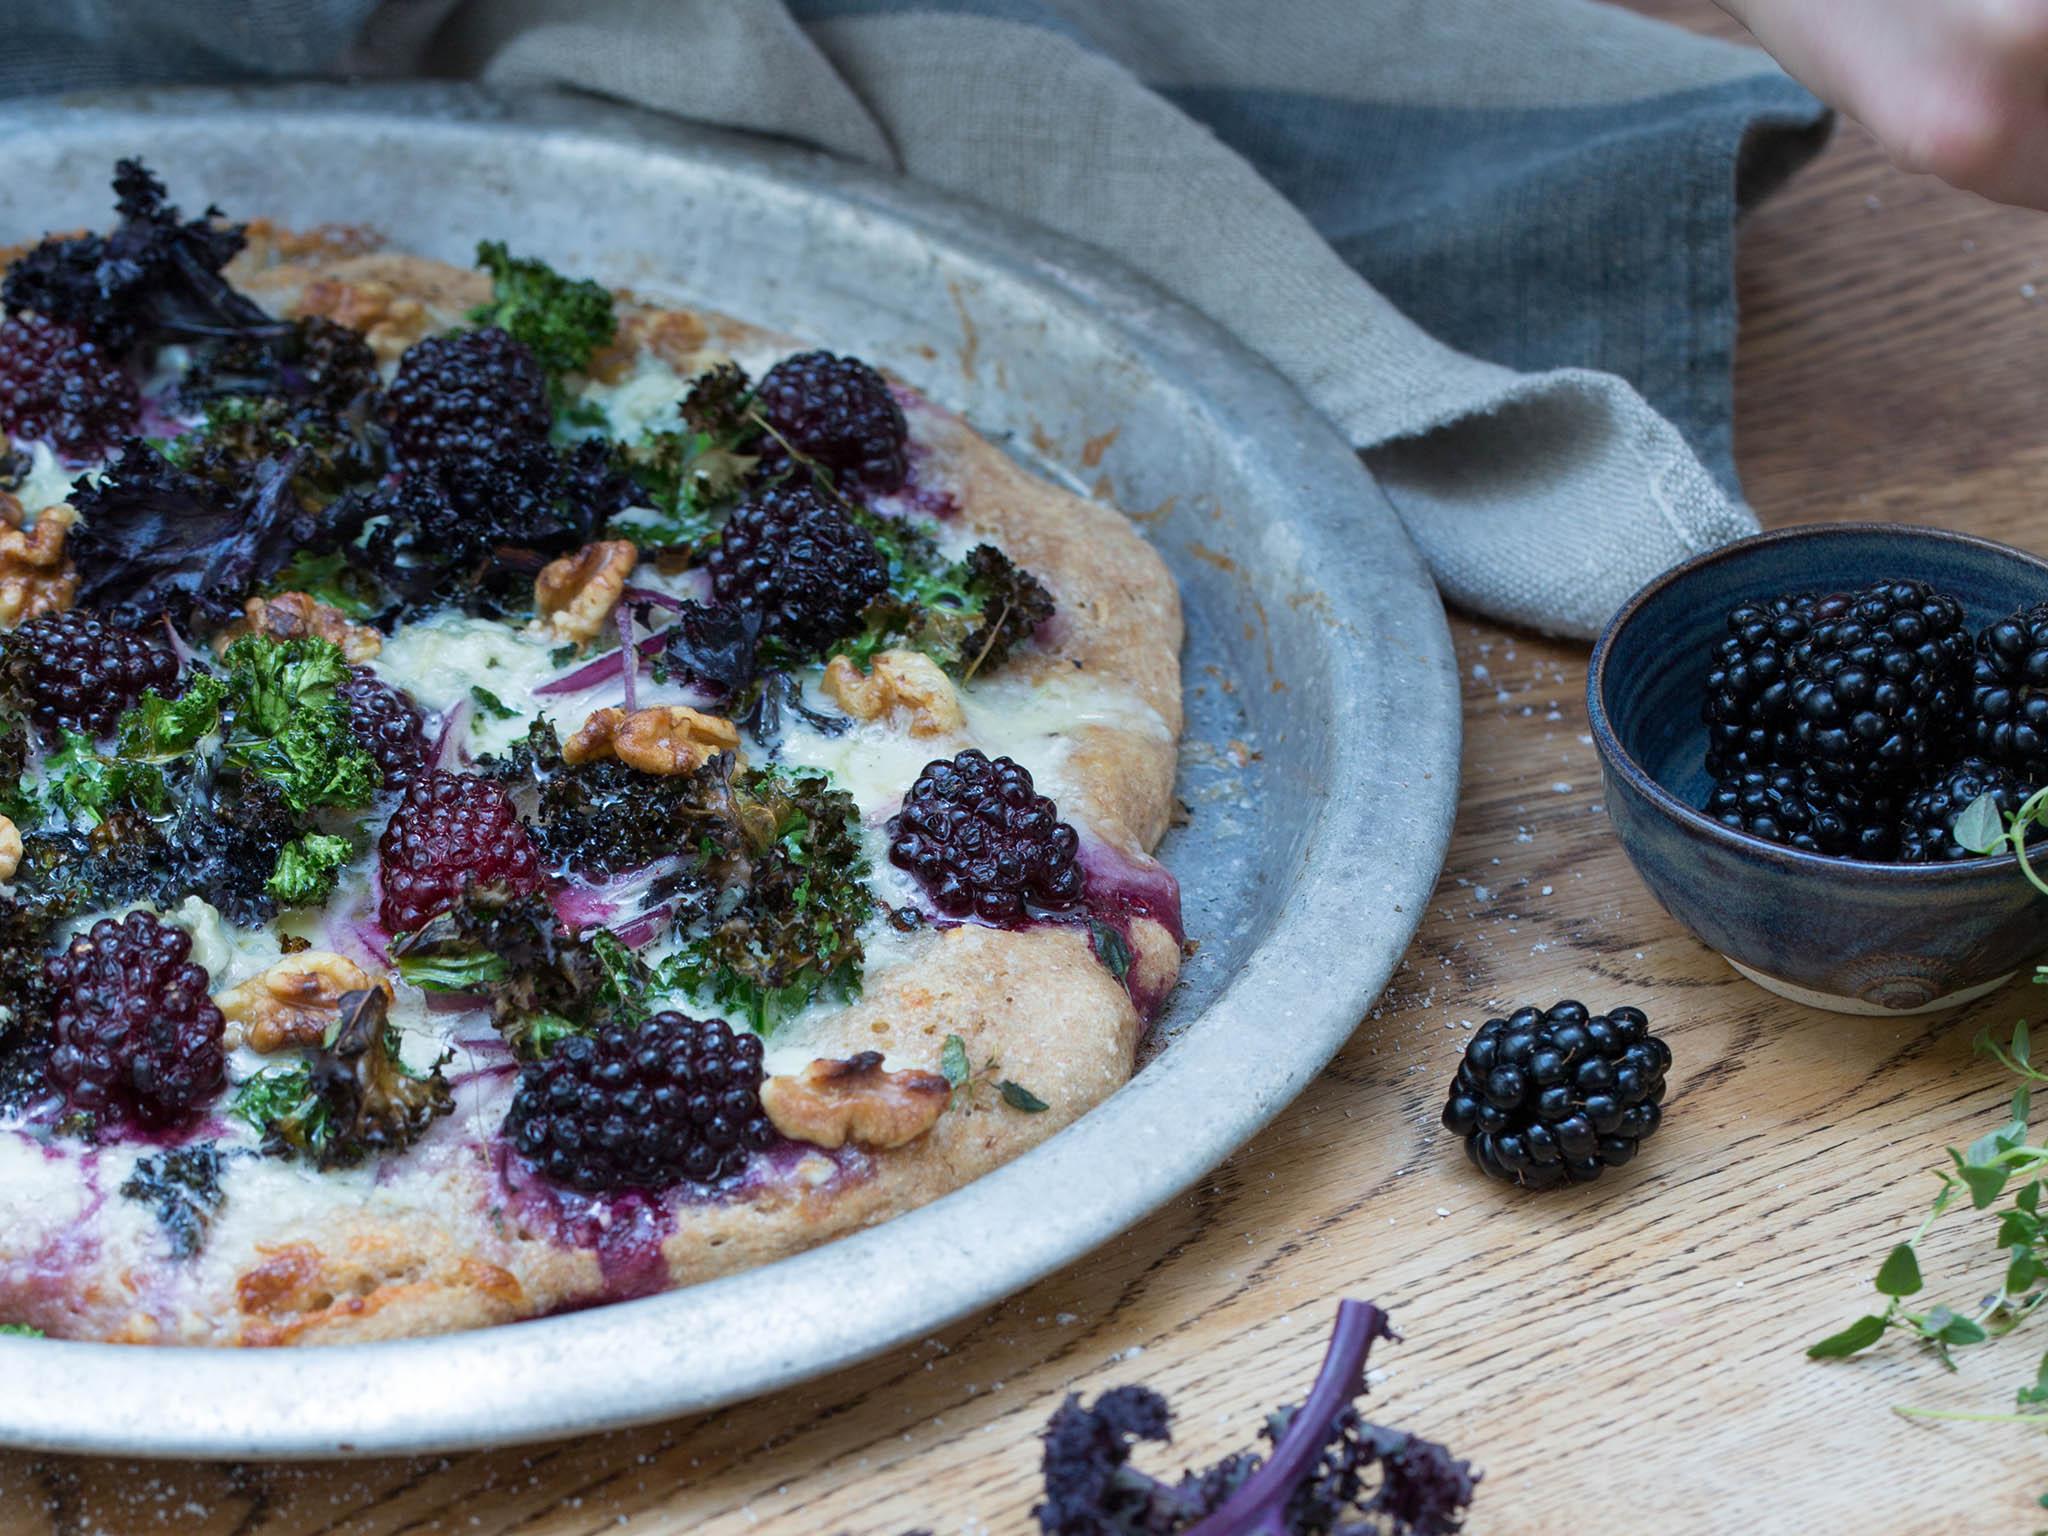 Pans out well: blackberries offer a curious complement to gorgonzola on this savoury pizza